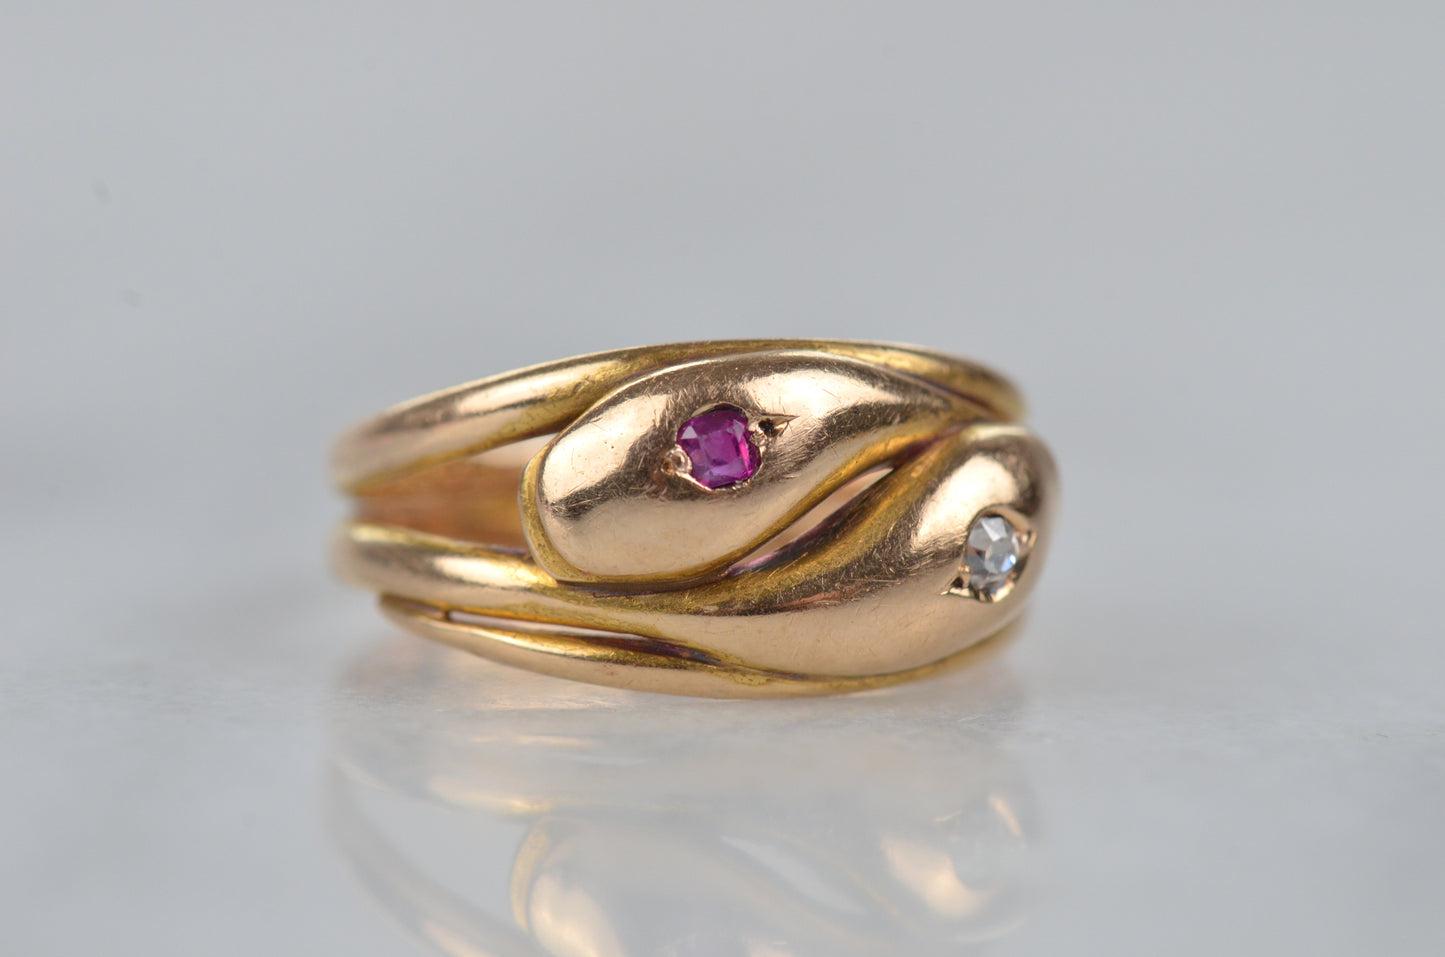 Endearing Victorian Double Snake Ring